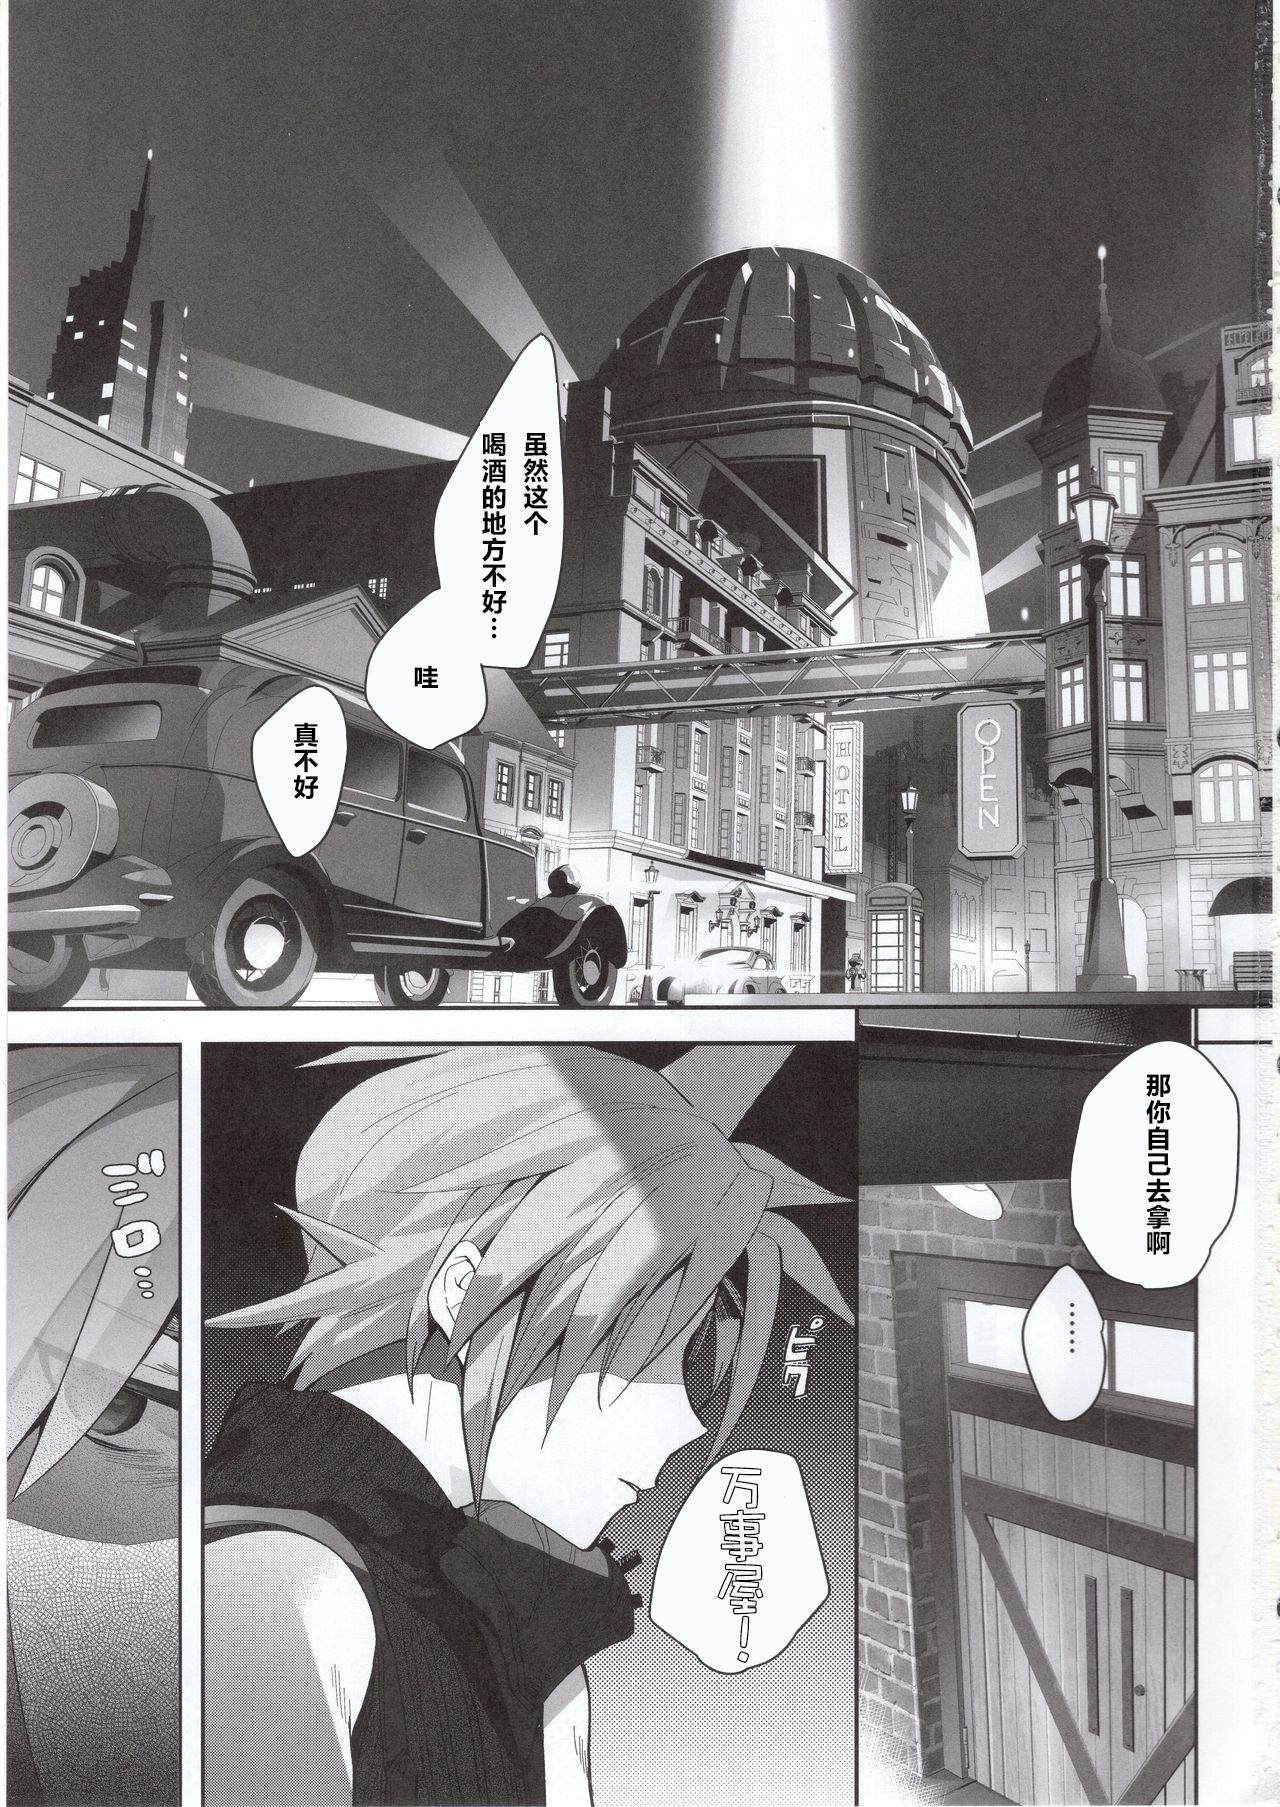 Prima Tantalizing Two Gill - Final fantasy vii Cut - Page 2